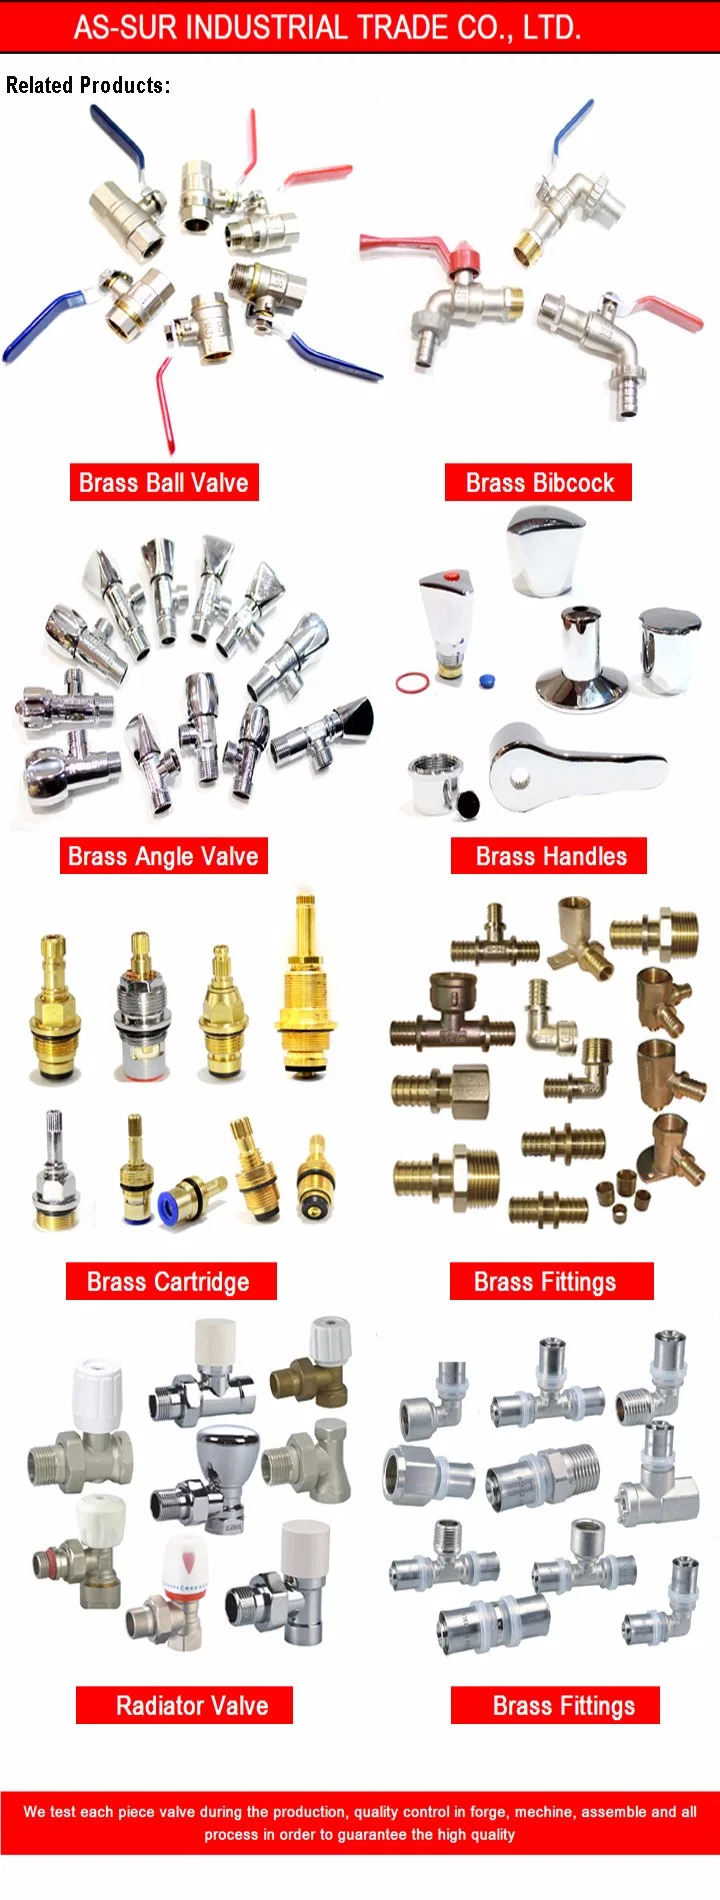 Various Models of Forged Brass Ball Valves